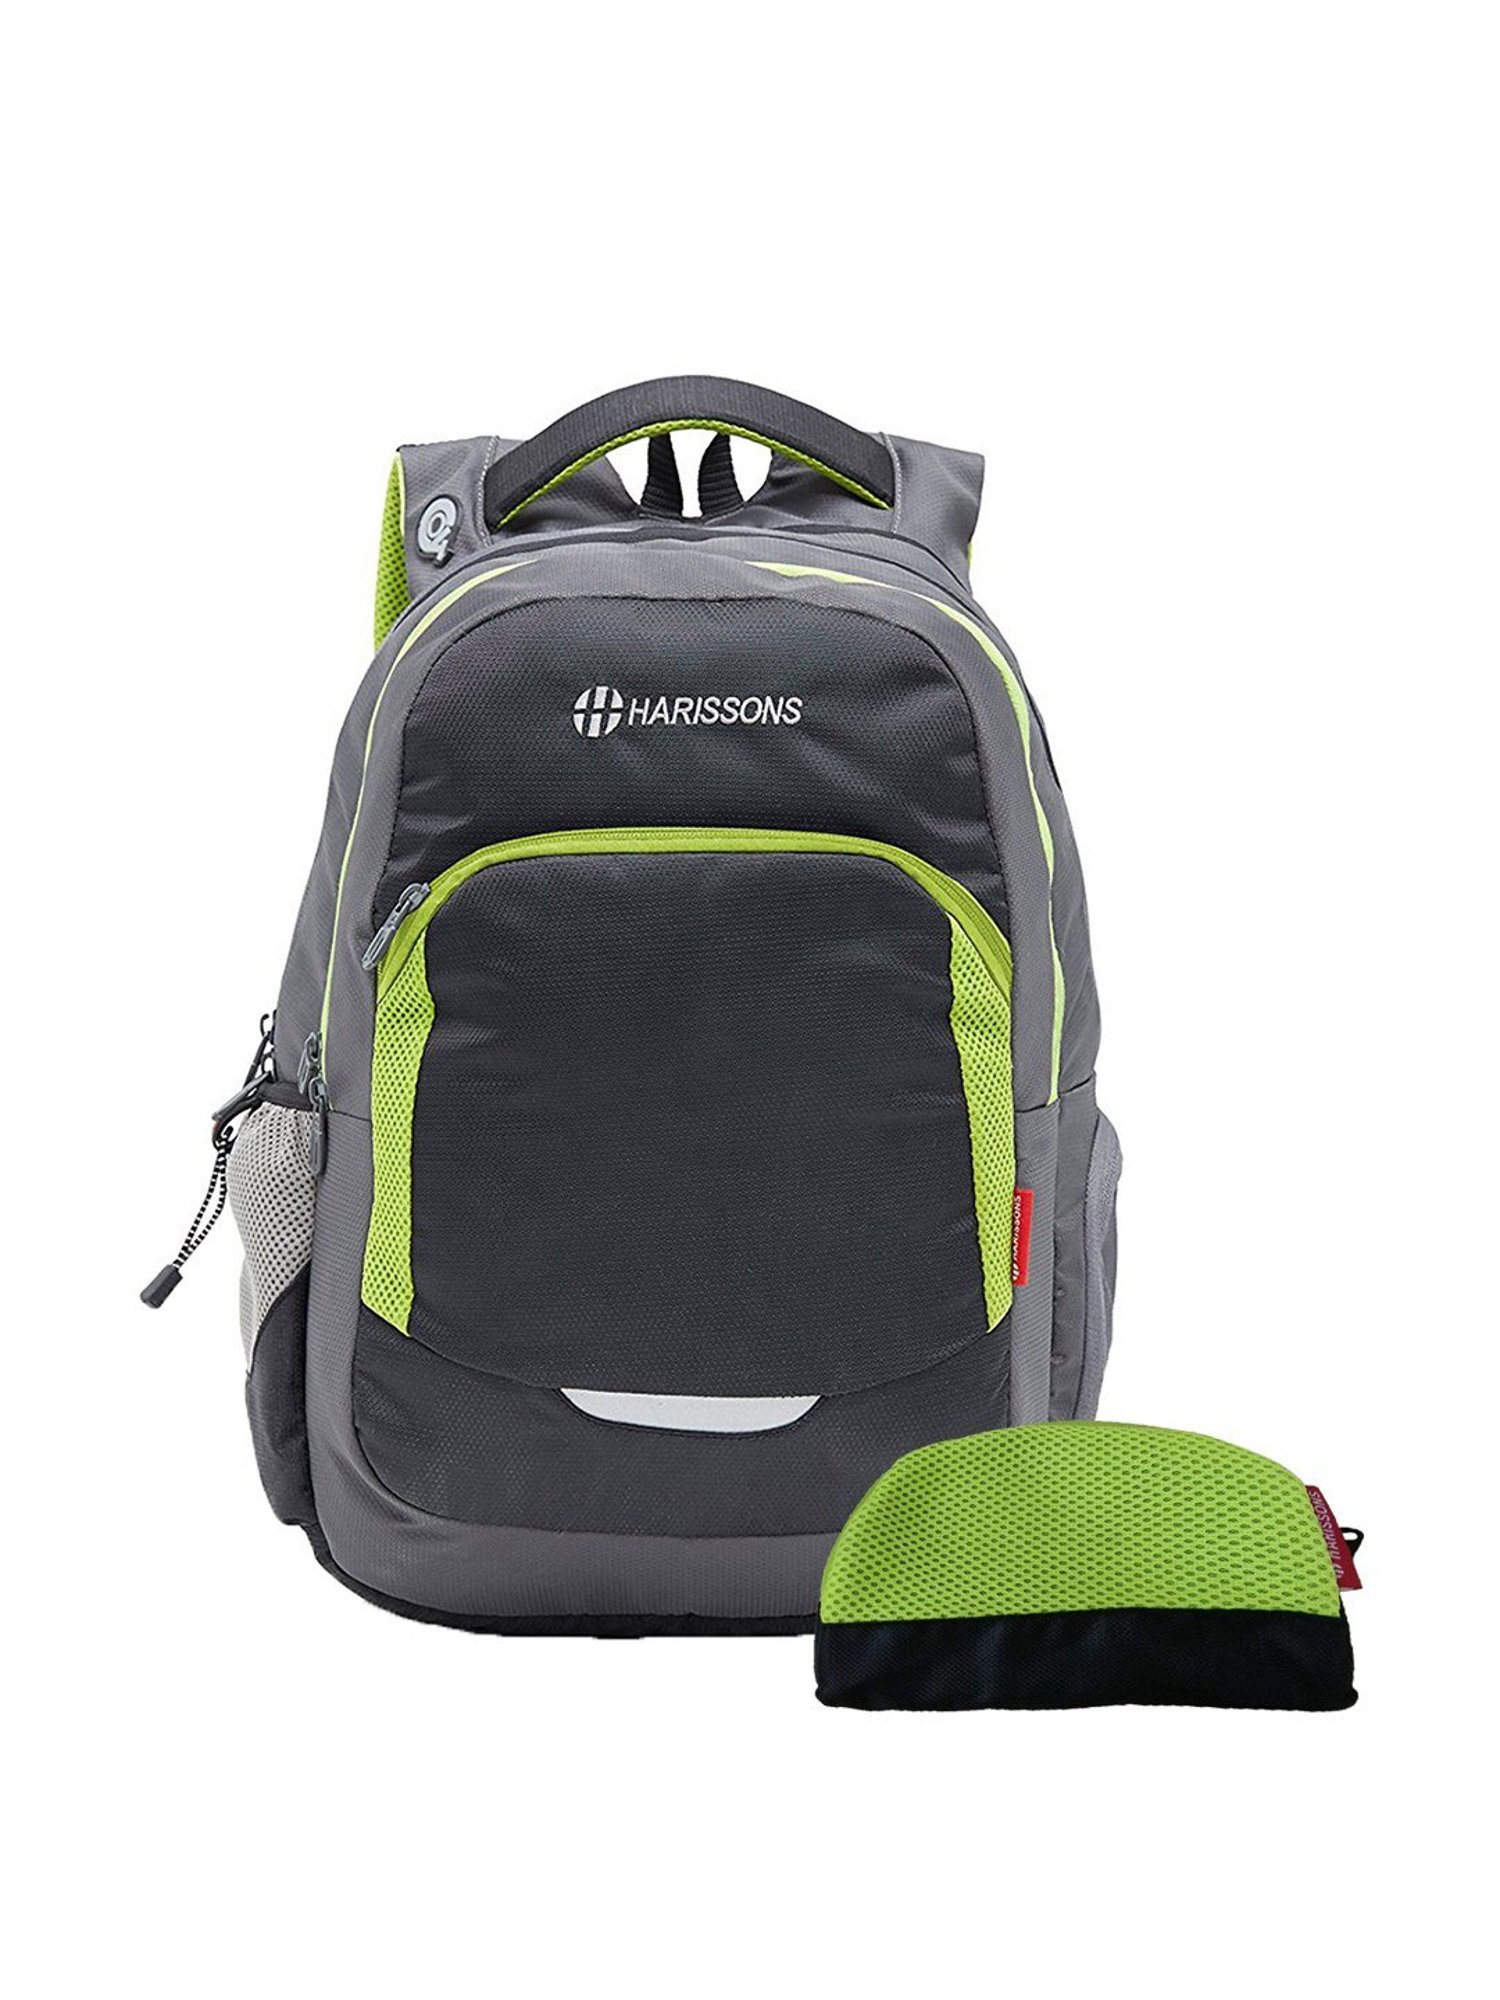 Harissons Bplt Small 18 Litres Polyester Laptop Backpack Grey in Hubli at  best price by Rajendra Stores - Justdial